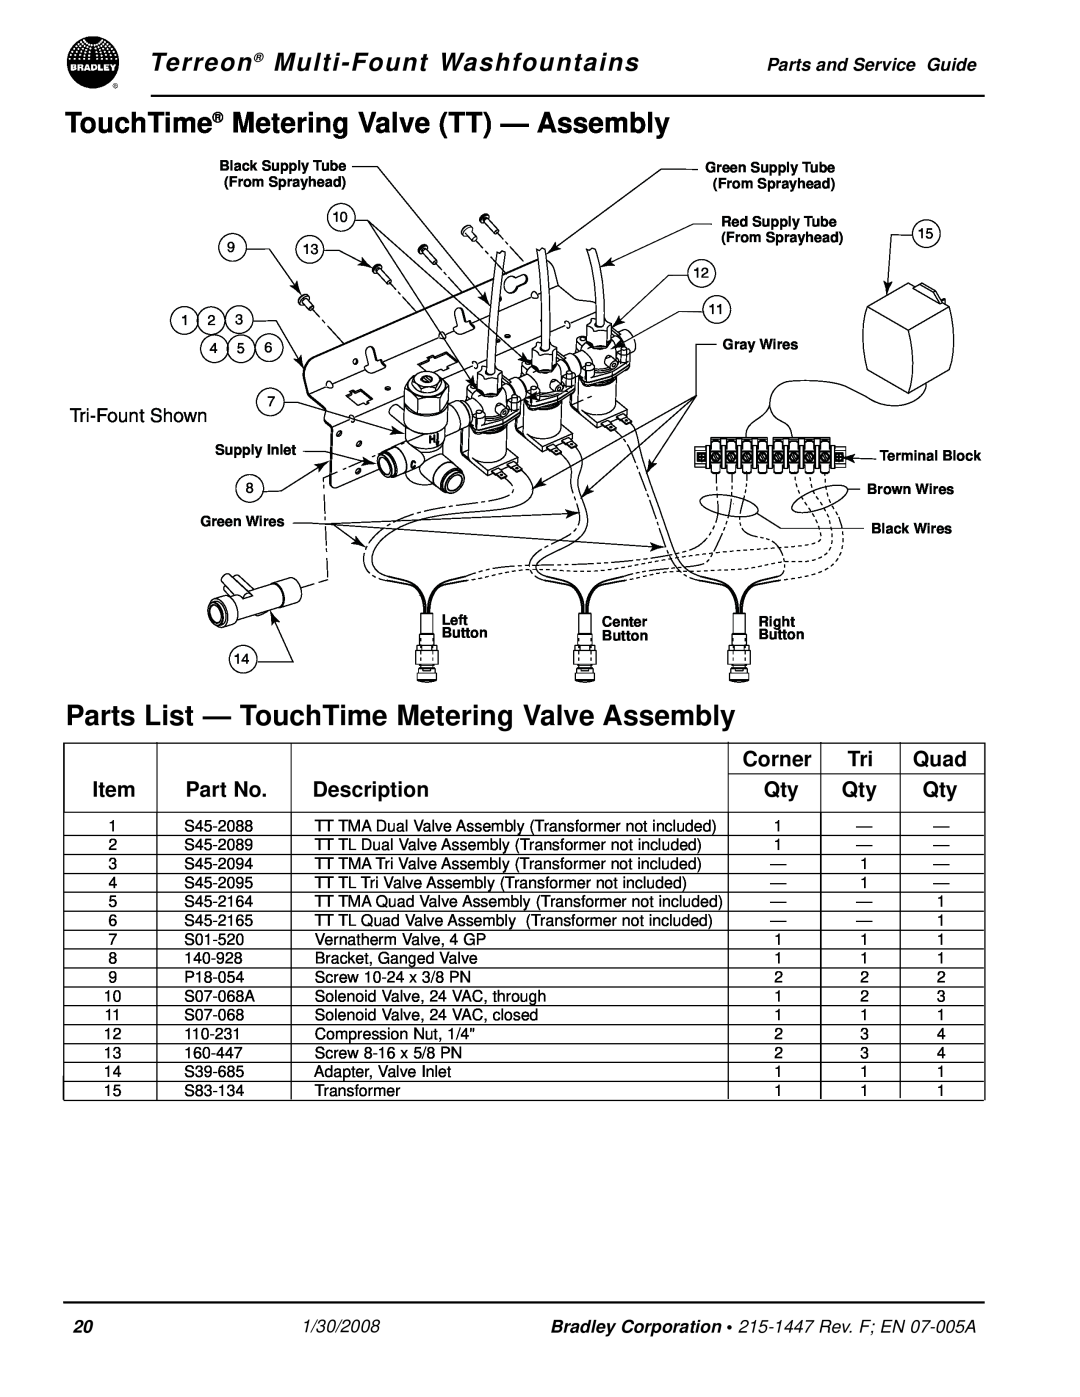 Bradley Smoker Indoor Furnishings TouchTime Metering Valve TT - Assembly, Parts List - TouchTime Metering Valve Assembly 